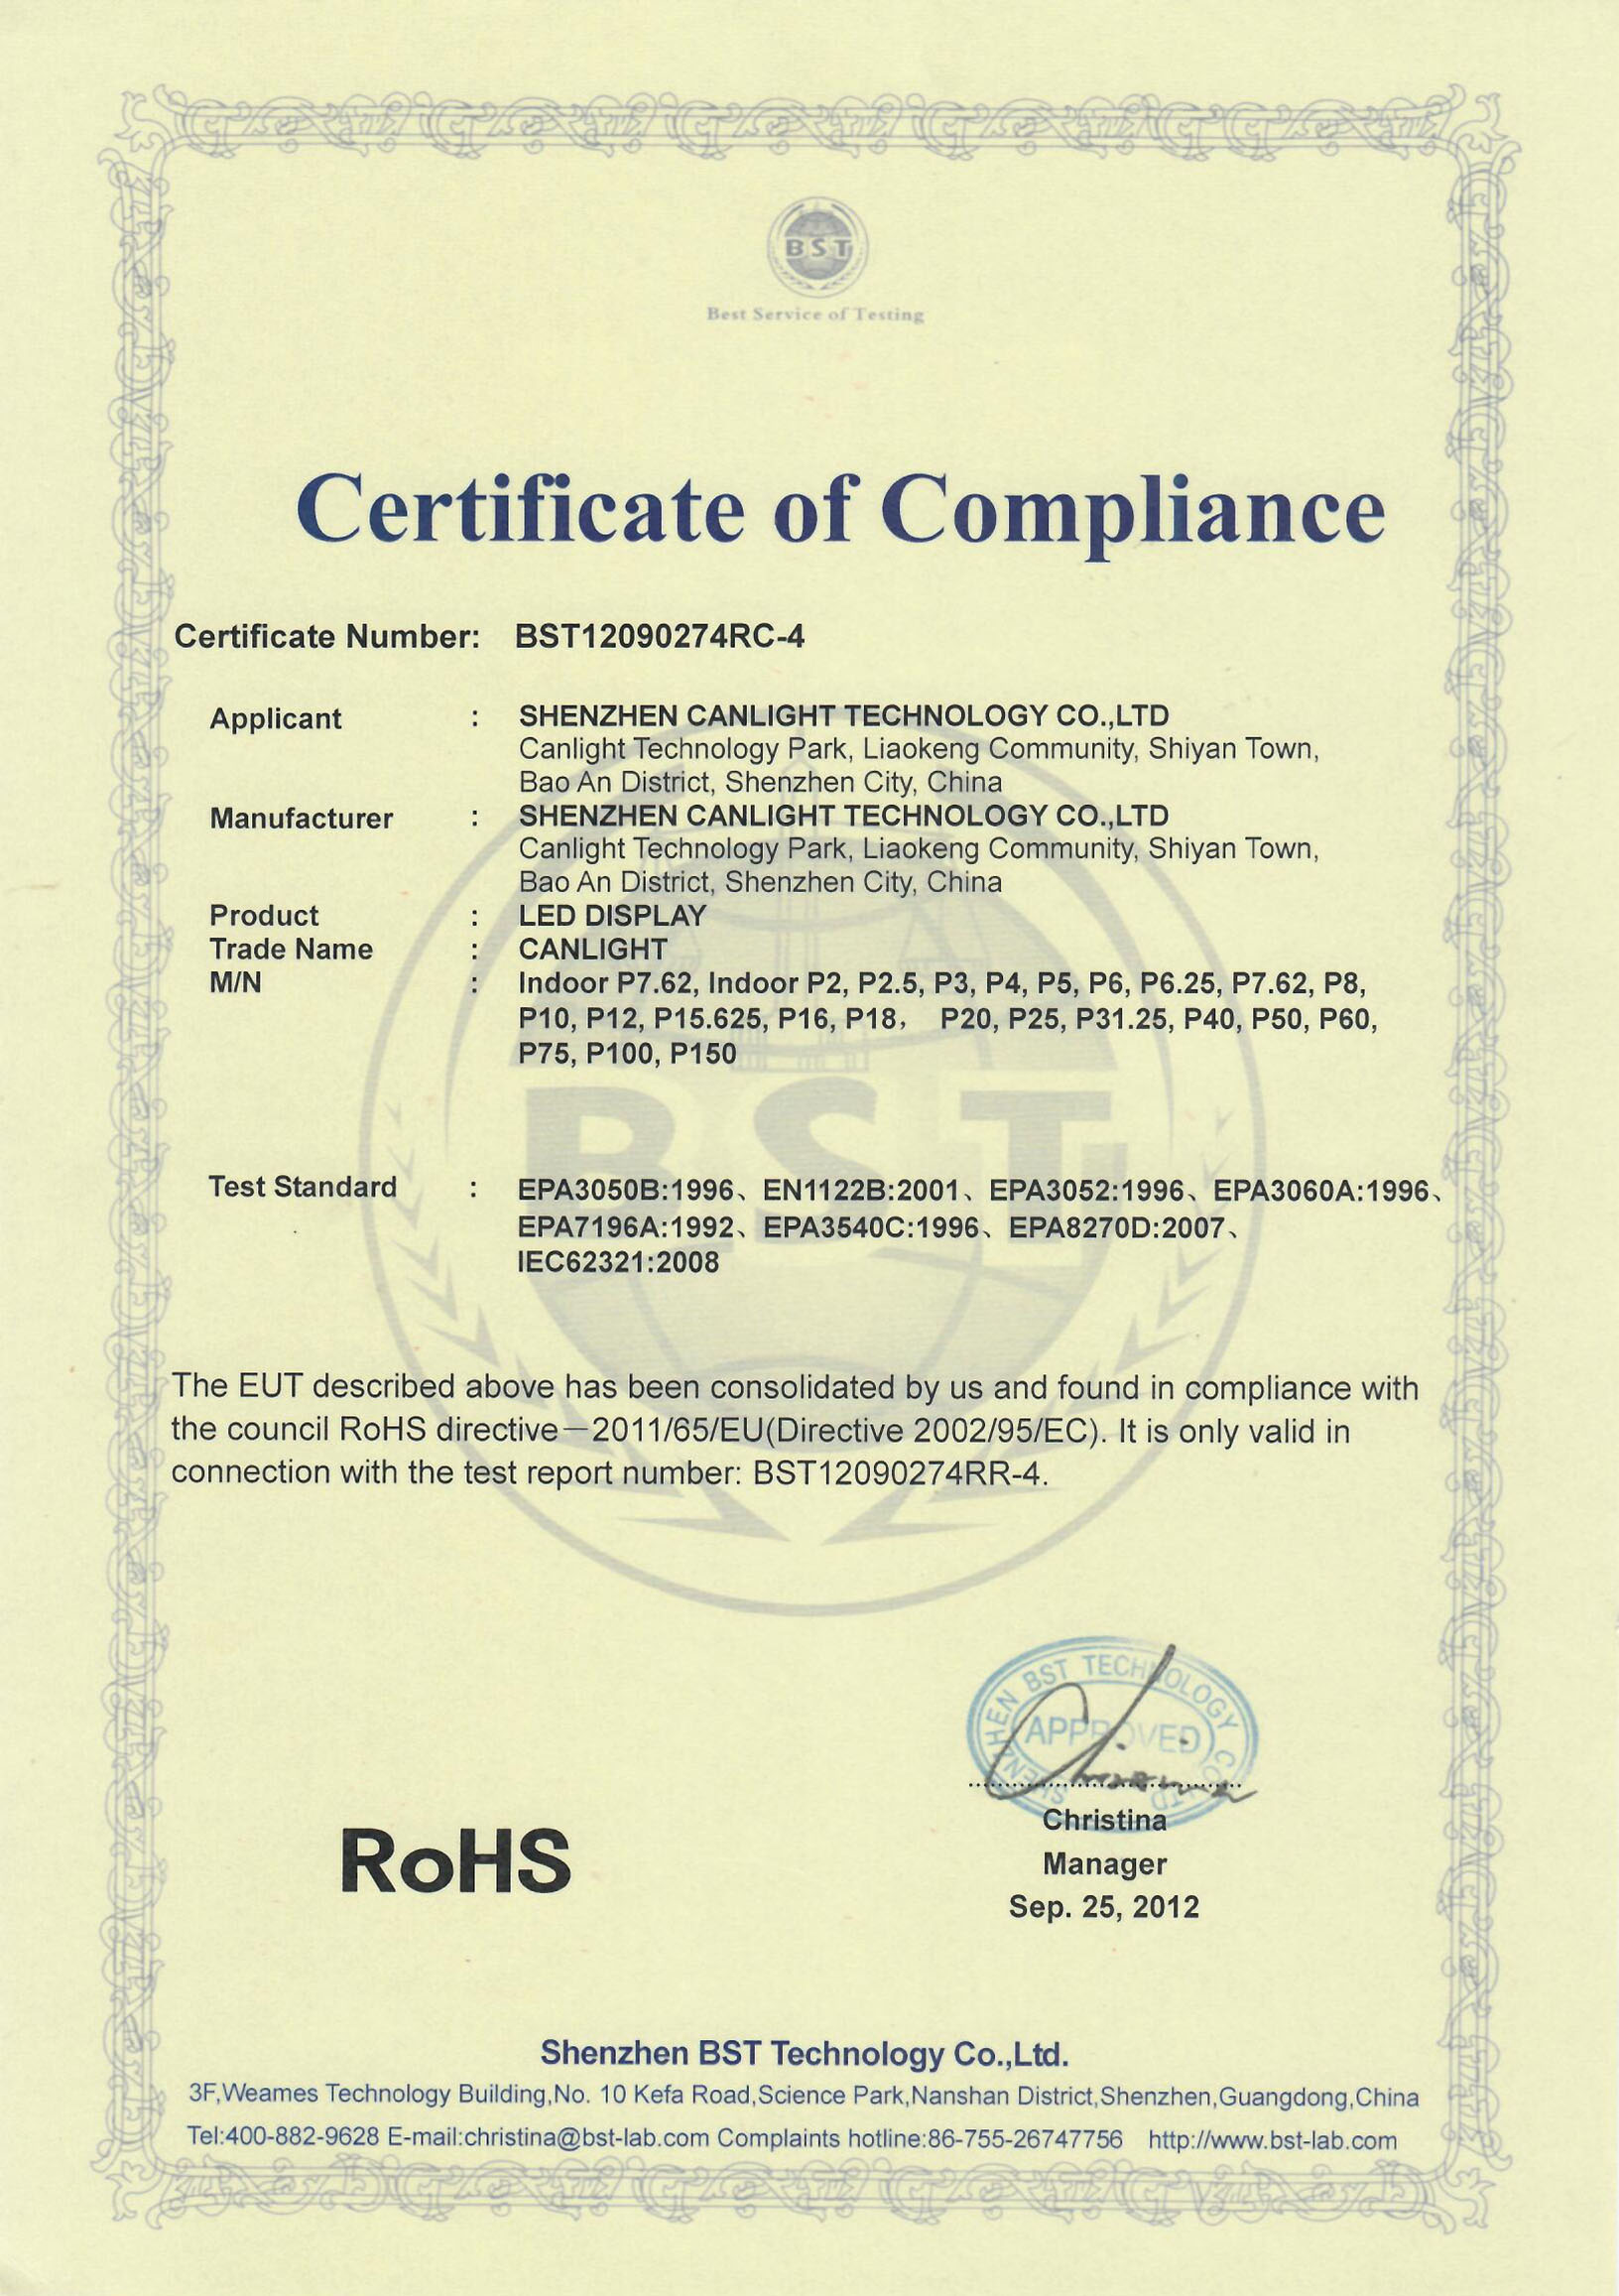 RoHS Certification of Indoor LED Display Screen from CANLIGHT